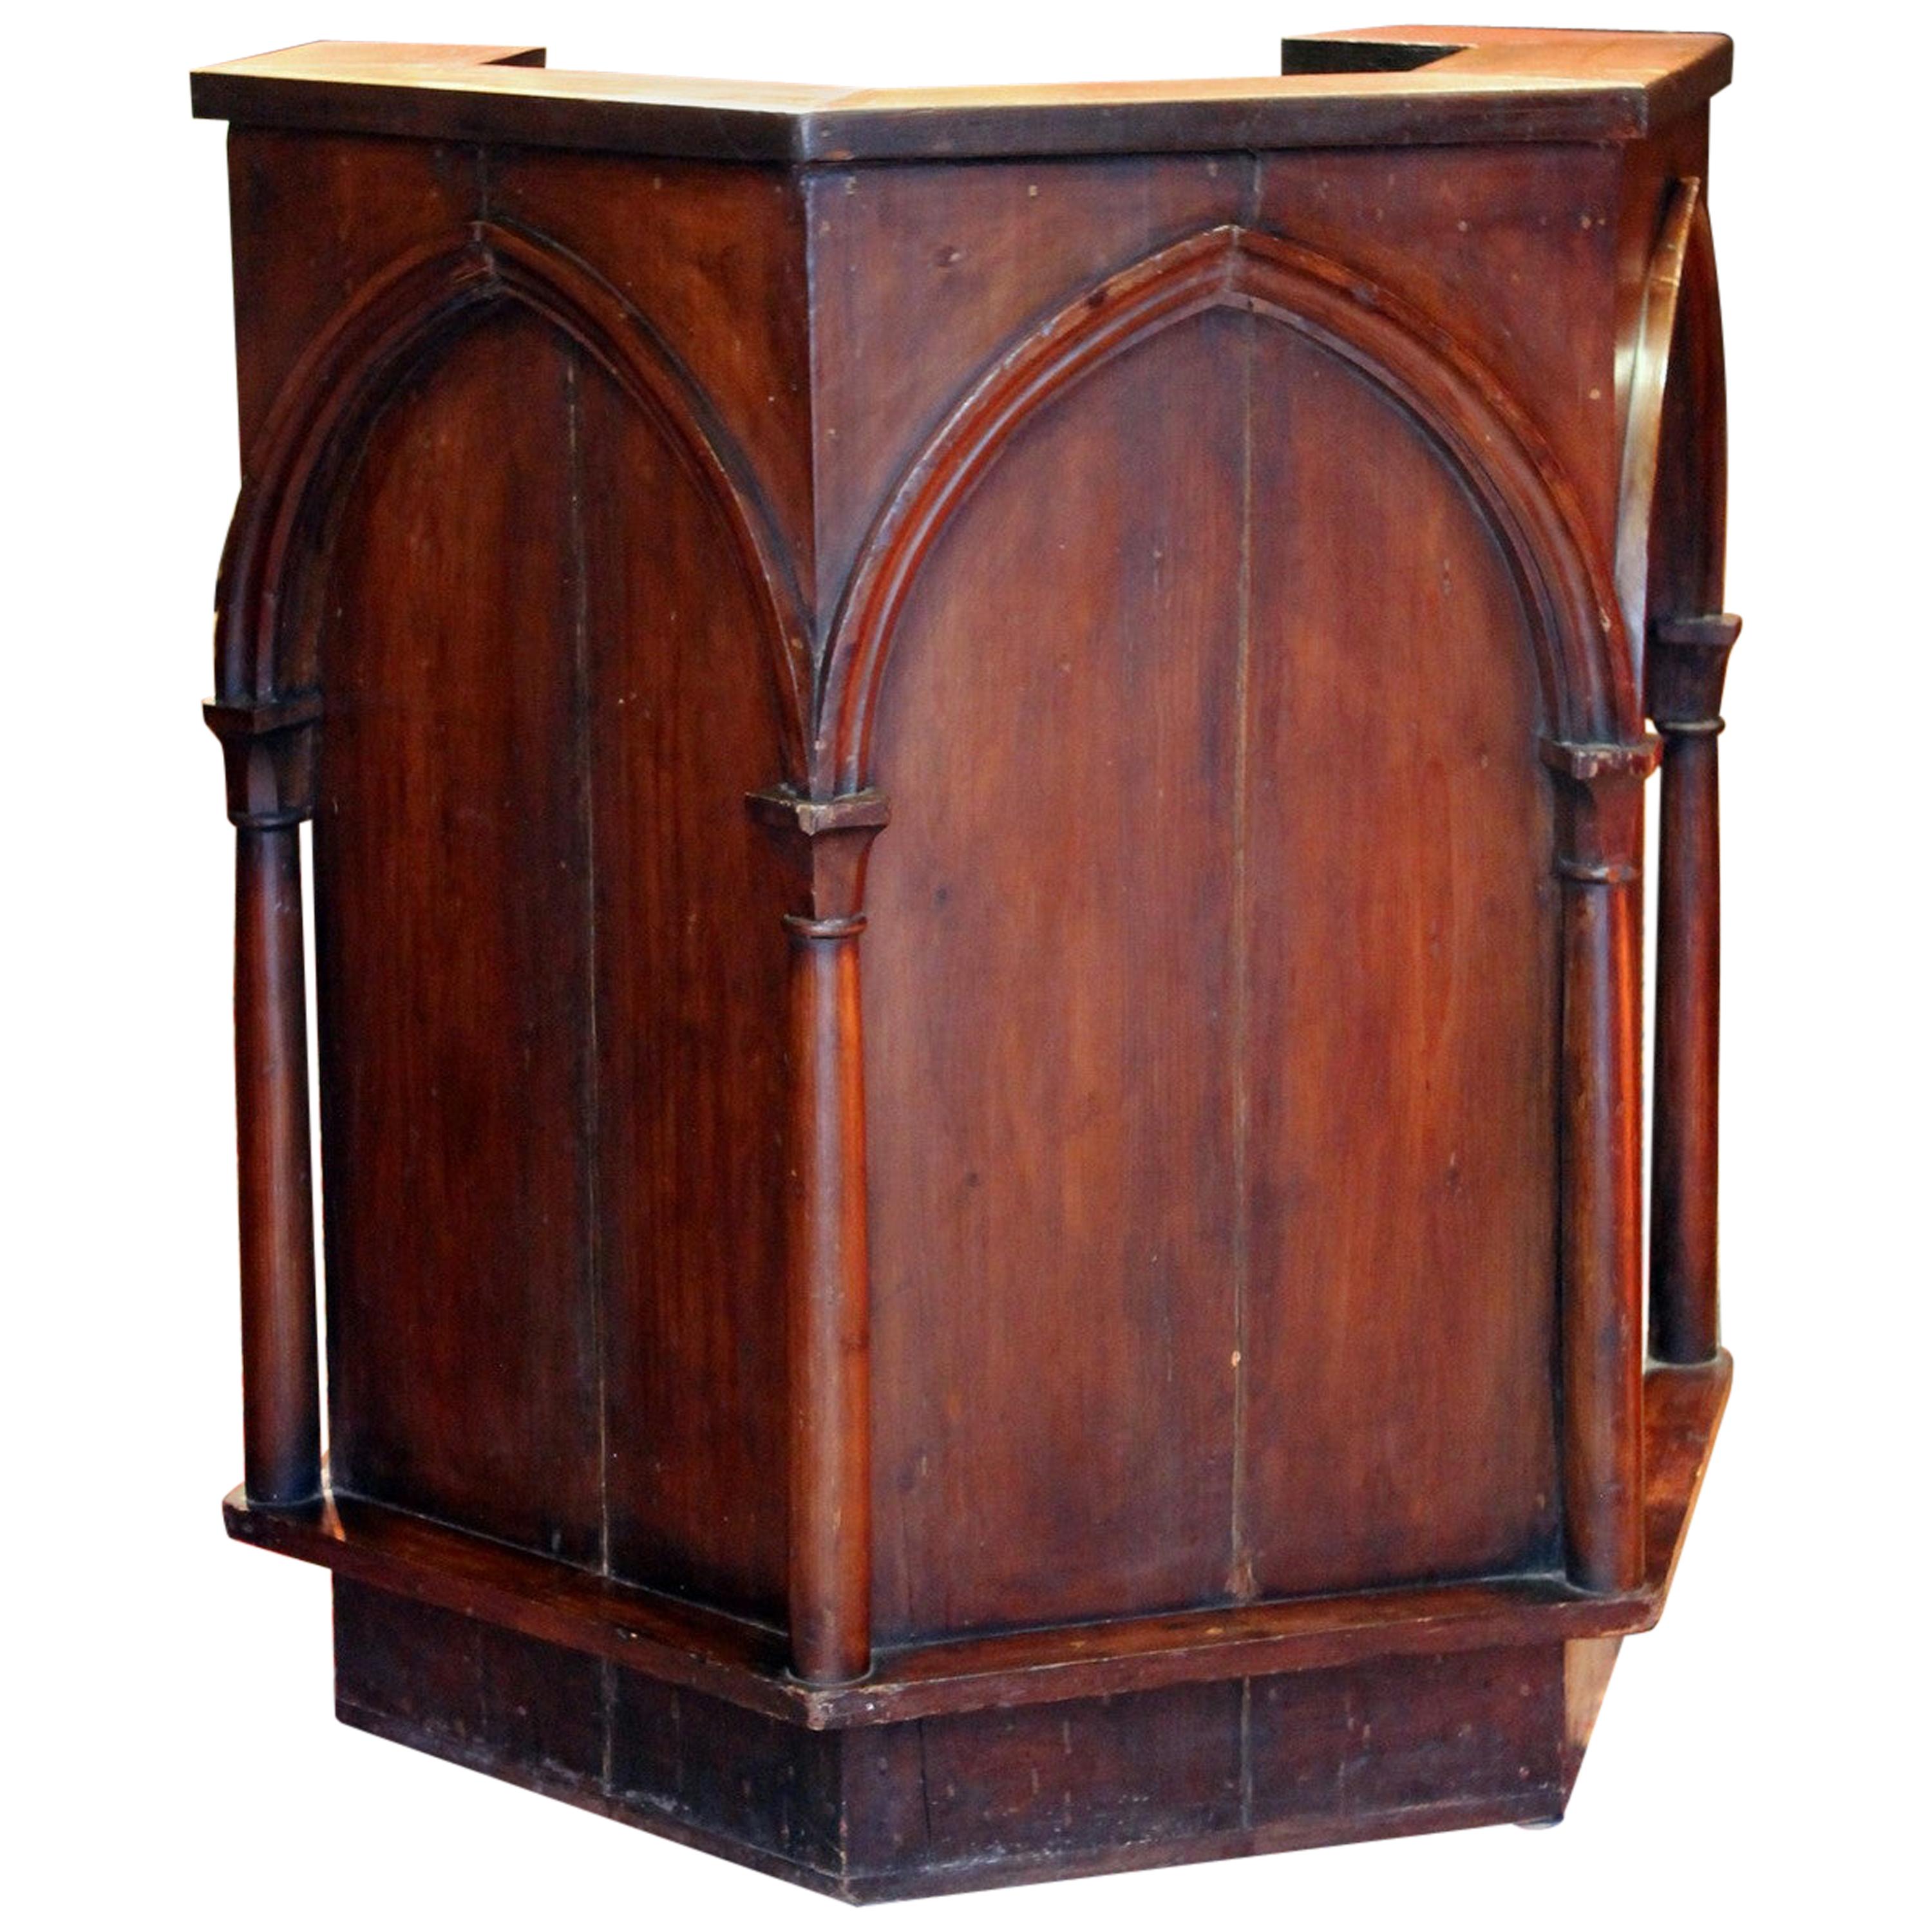 Gothic Revival Carved Walnut Wood Pulpit or Bar Counter Arches and Columns Shape